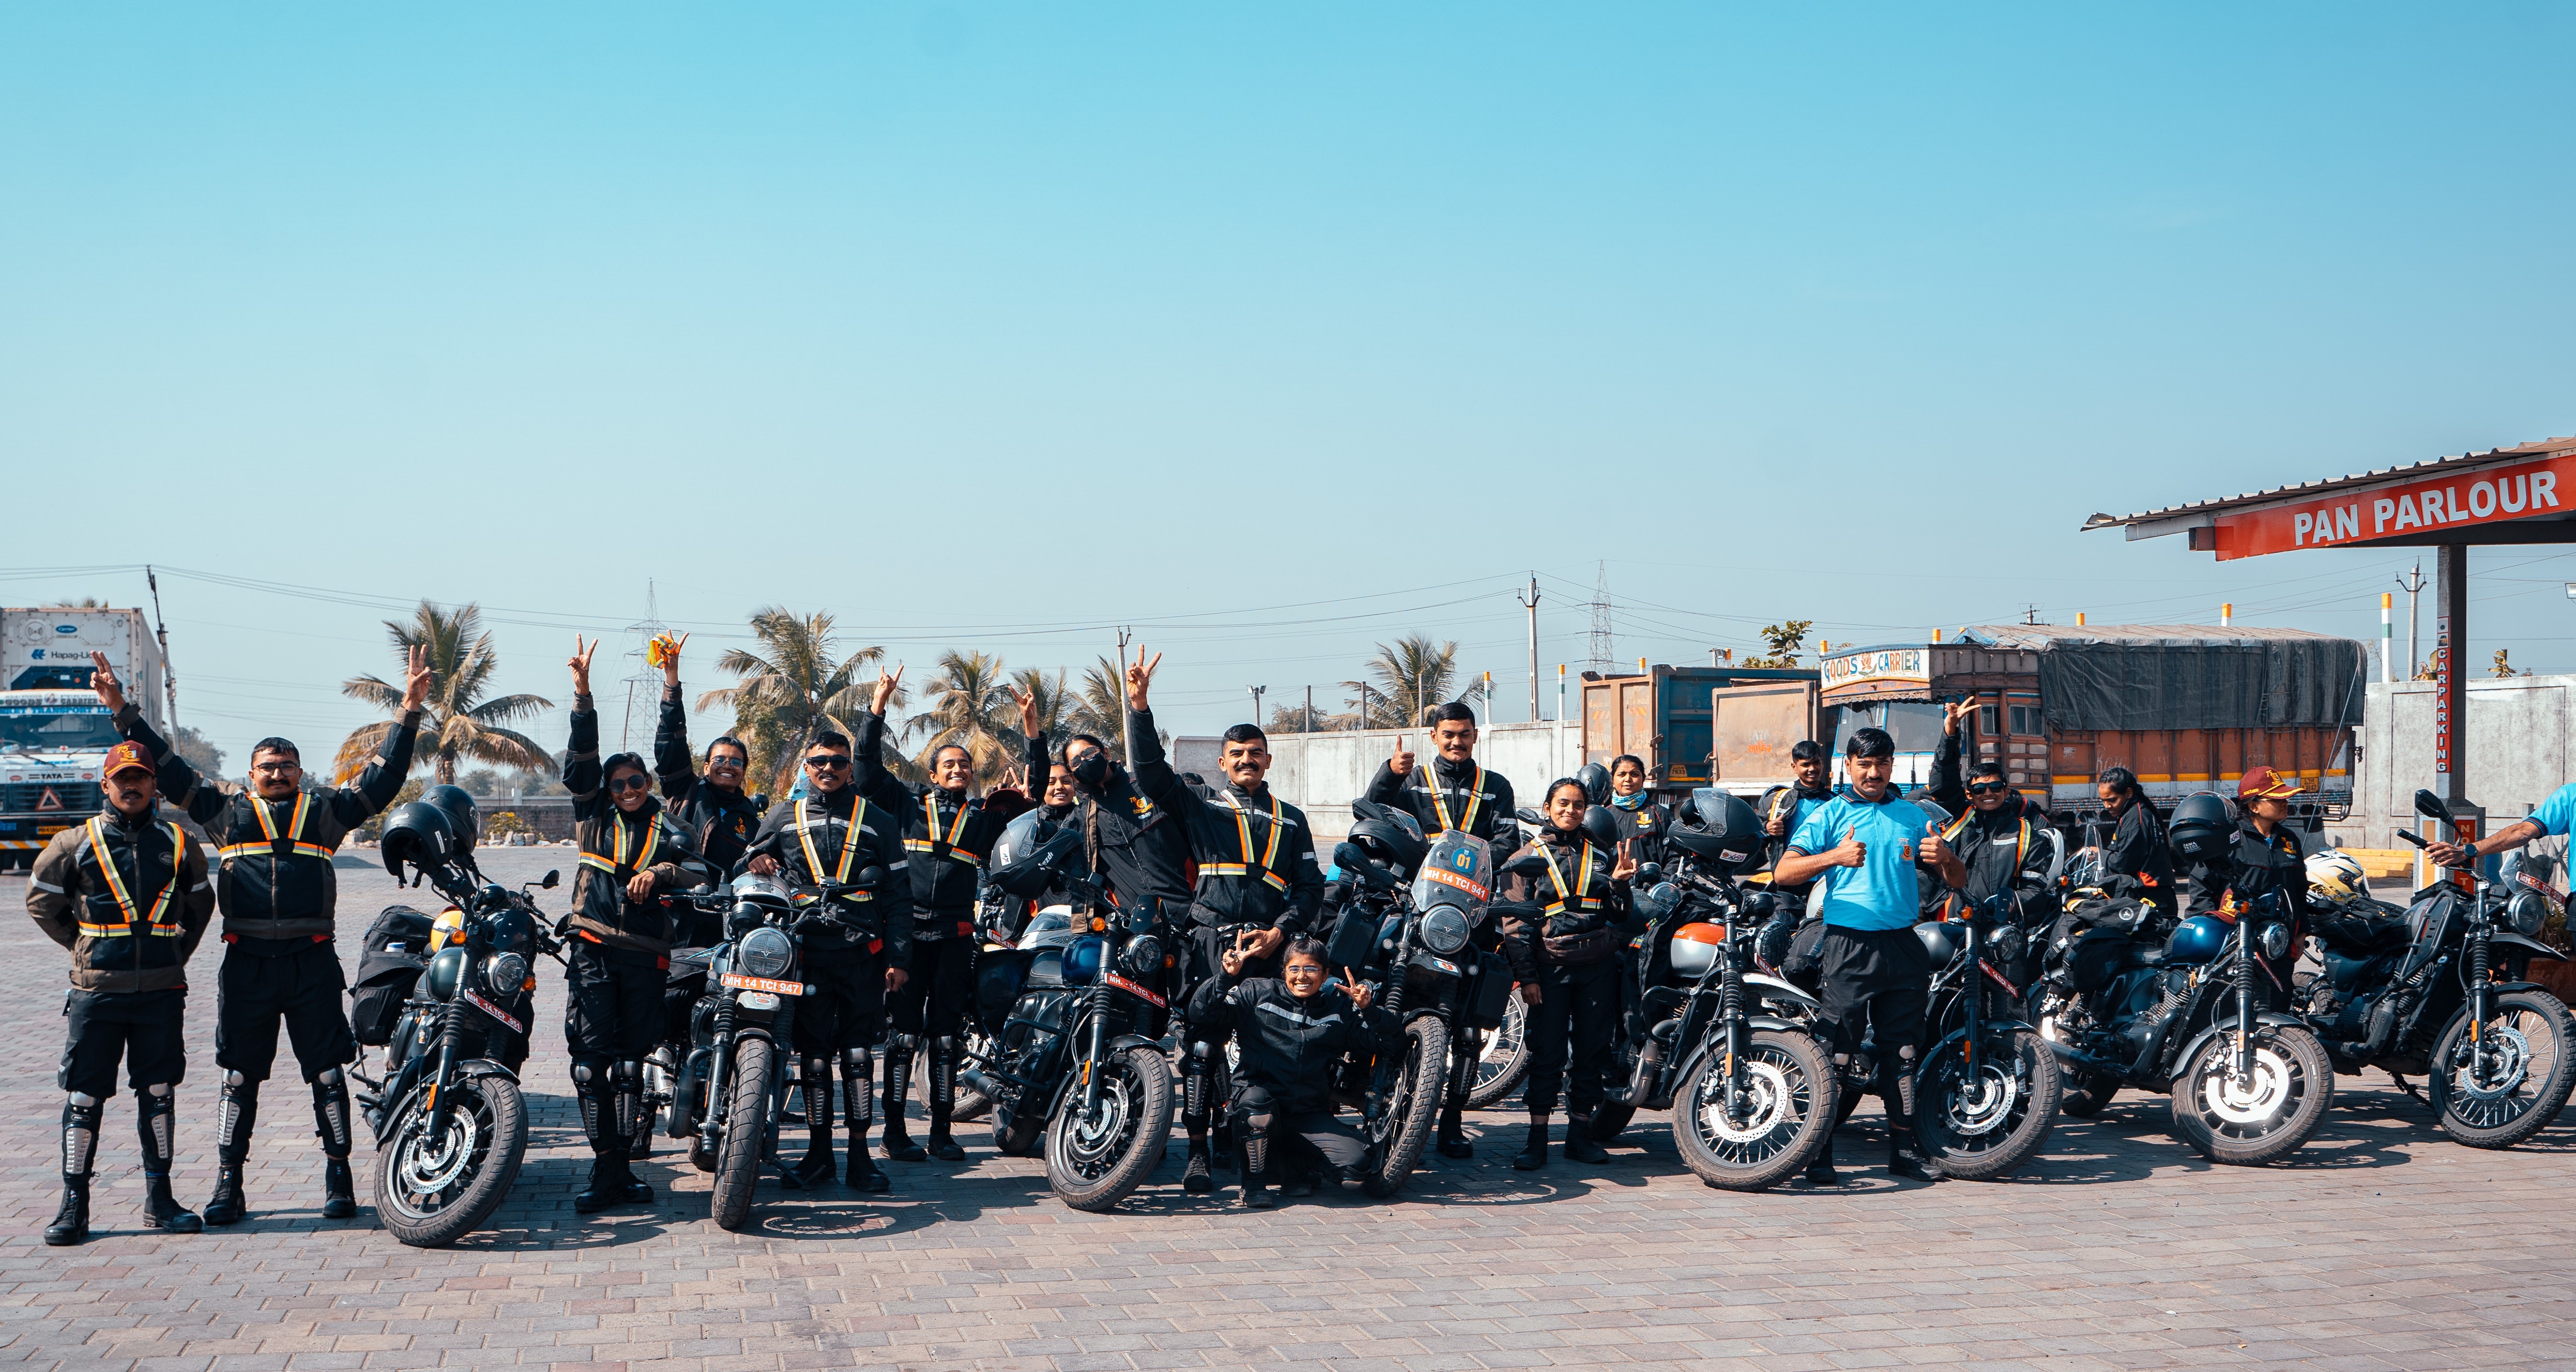 Jawa Yezdi Motorcycles partners with NCC’s 'Dandi Se Dilli' Motorcycle Rally to commemorate their 75th anniversary celebrations